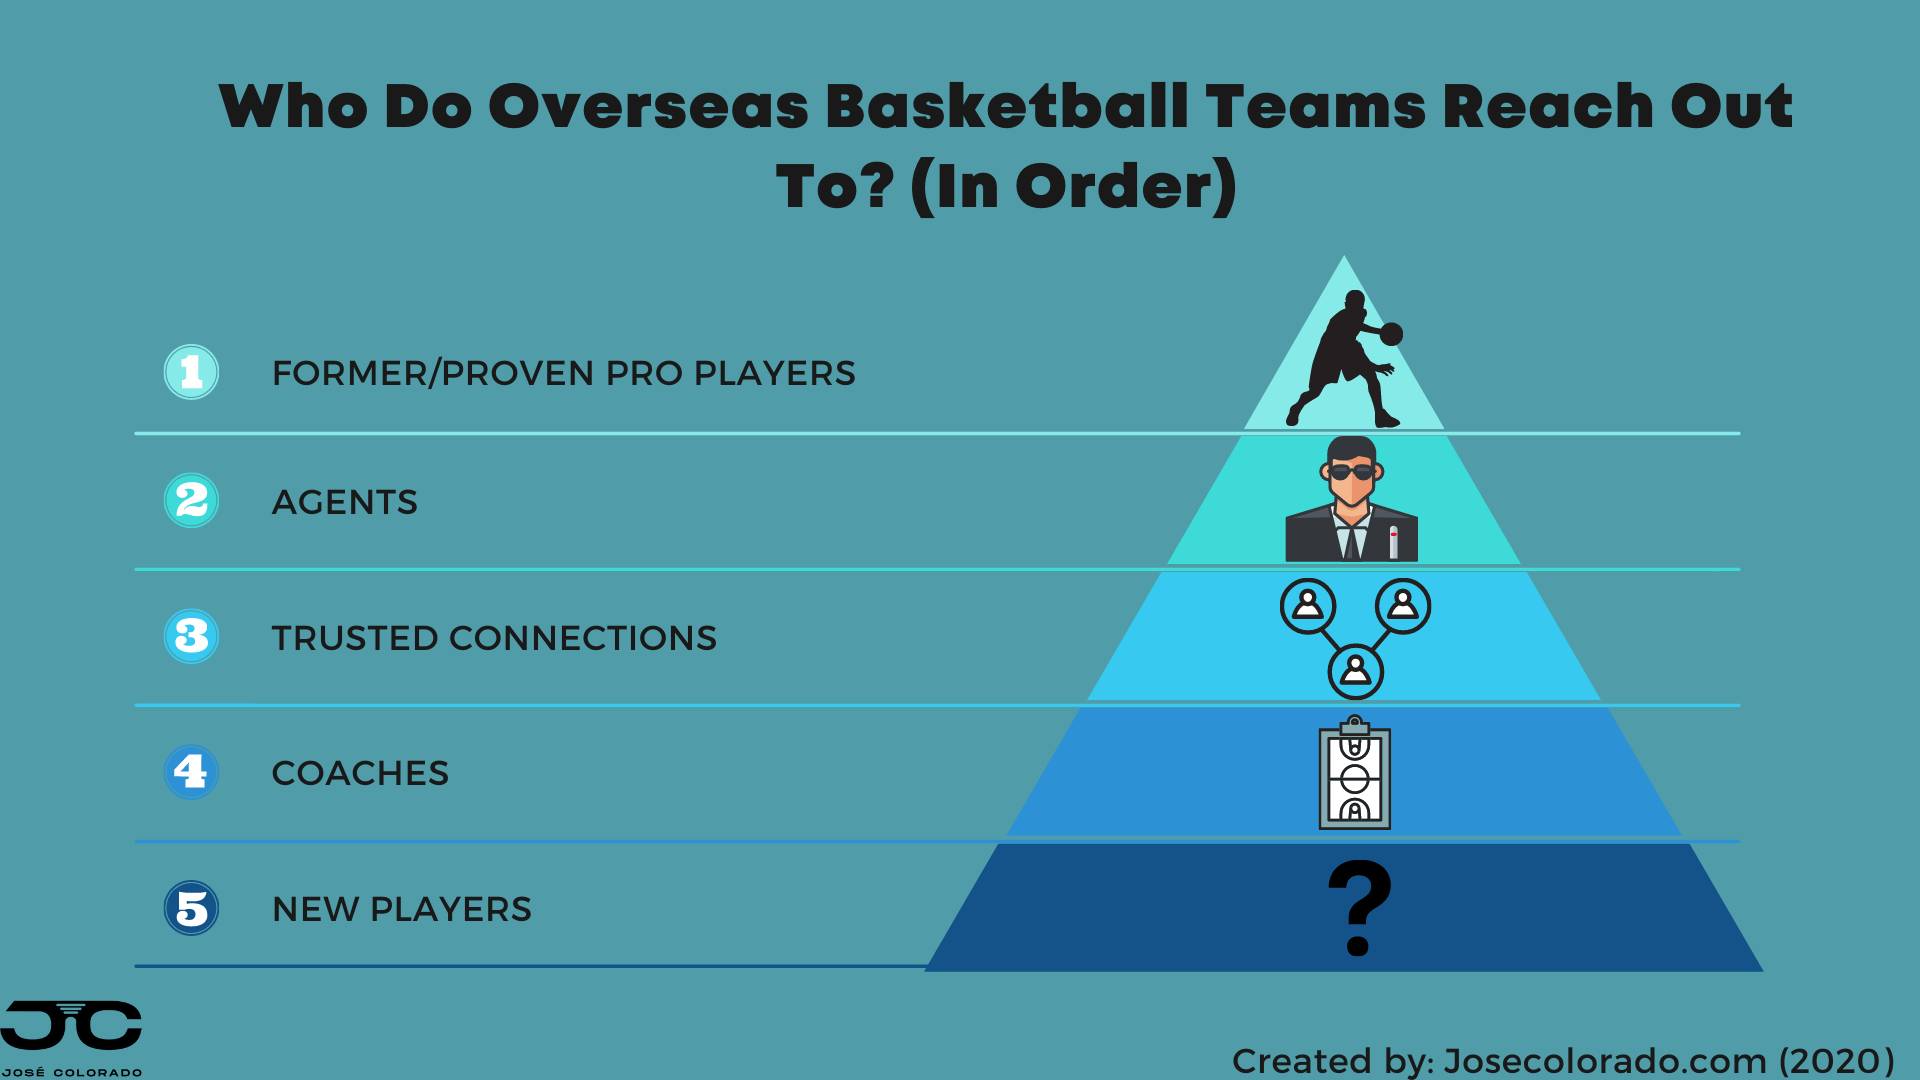 Overseas Basketball tryouts can be achieved through many different ways including connections, agents, scouts and basketball combines.